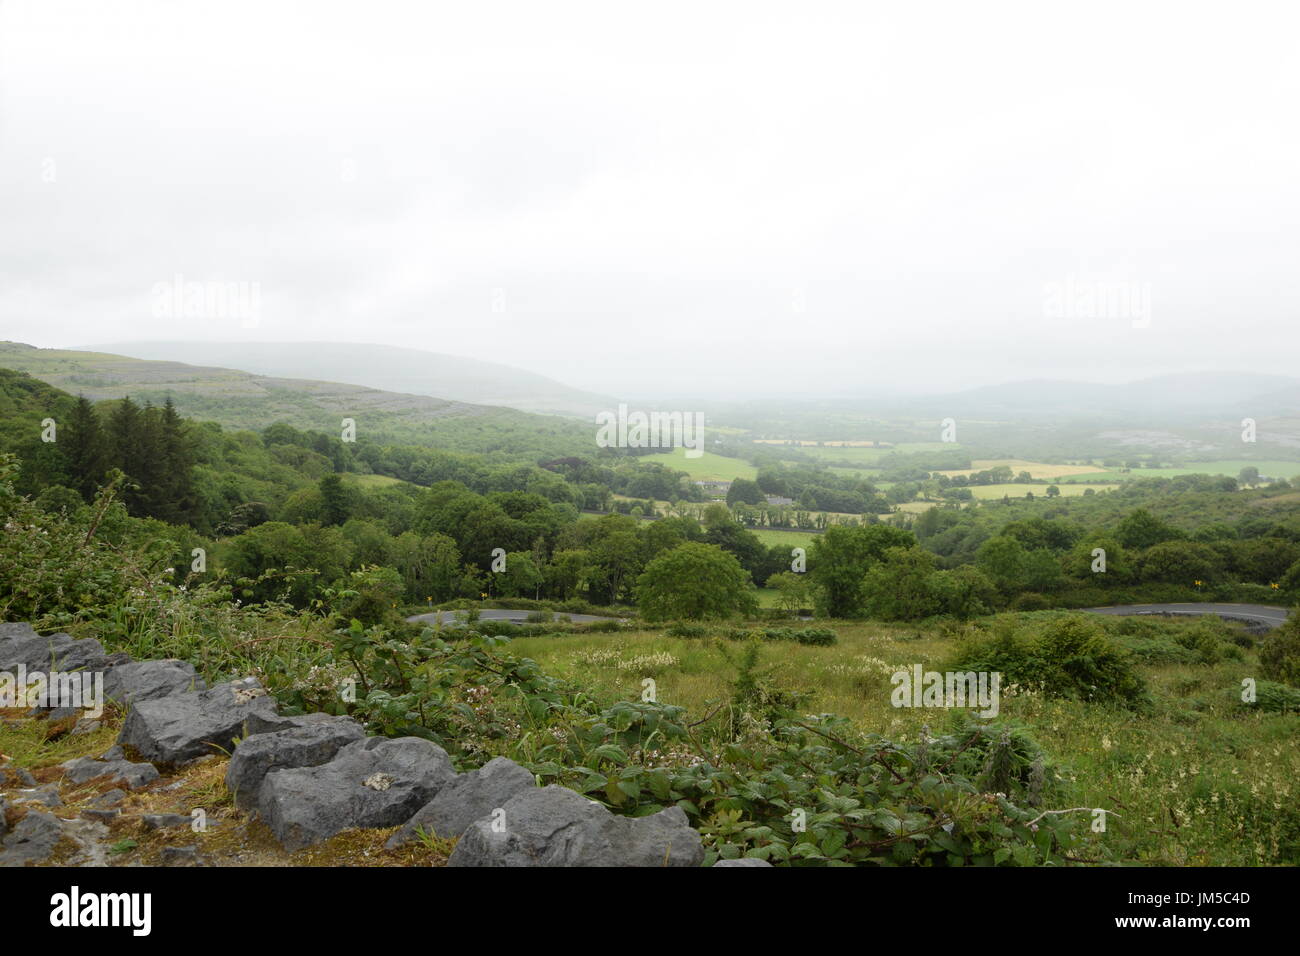 View of the area from the Corkscrew Hill in the County Clare, west Ireland Stock Photo